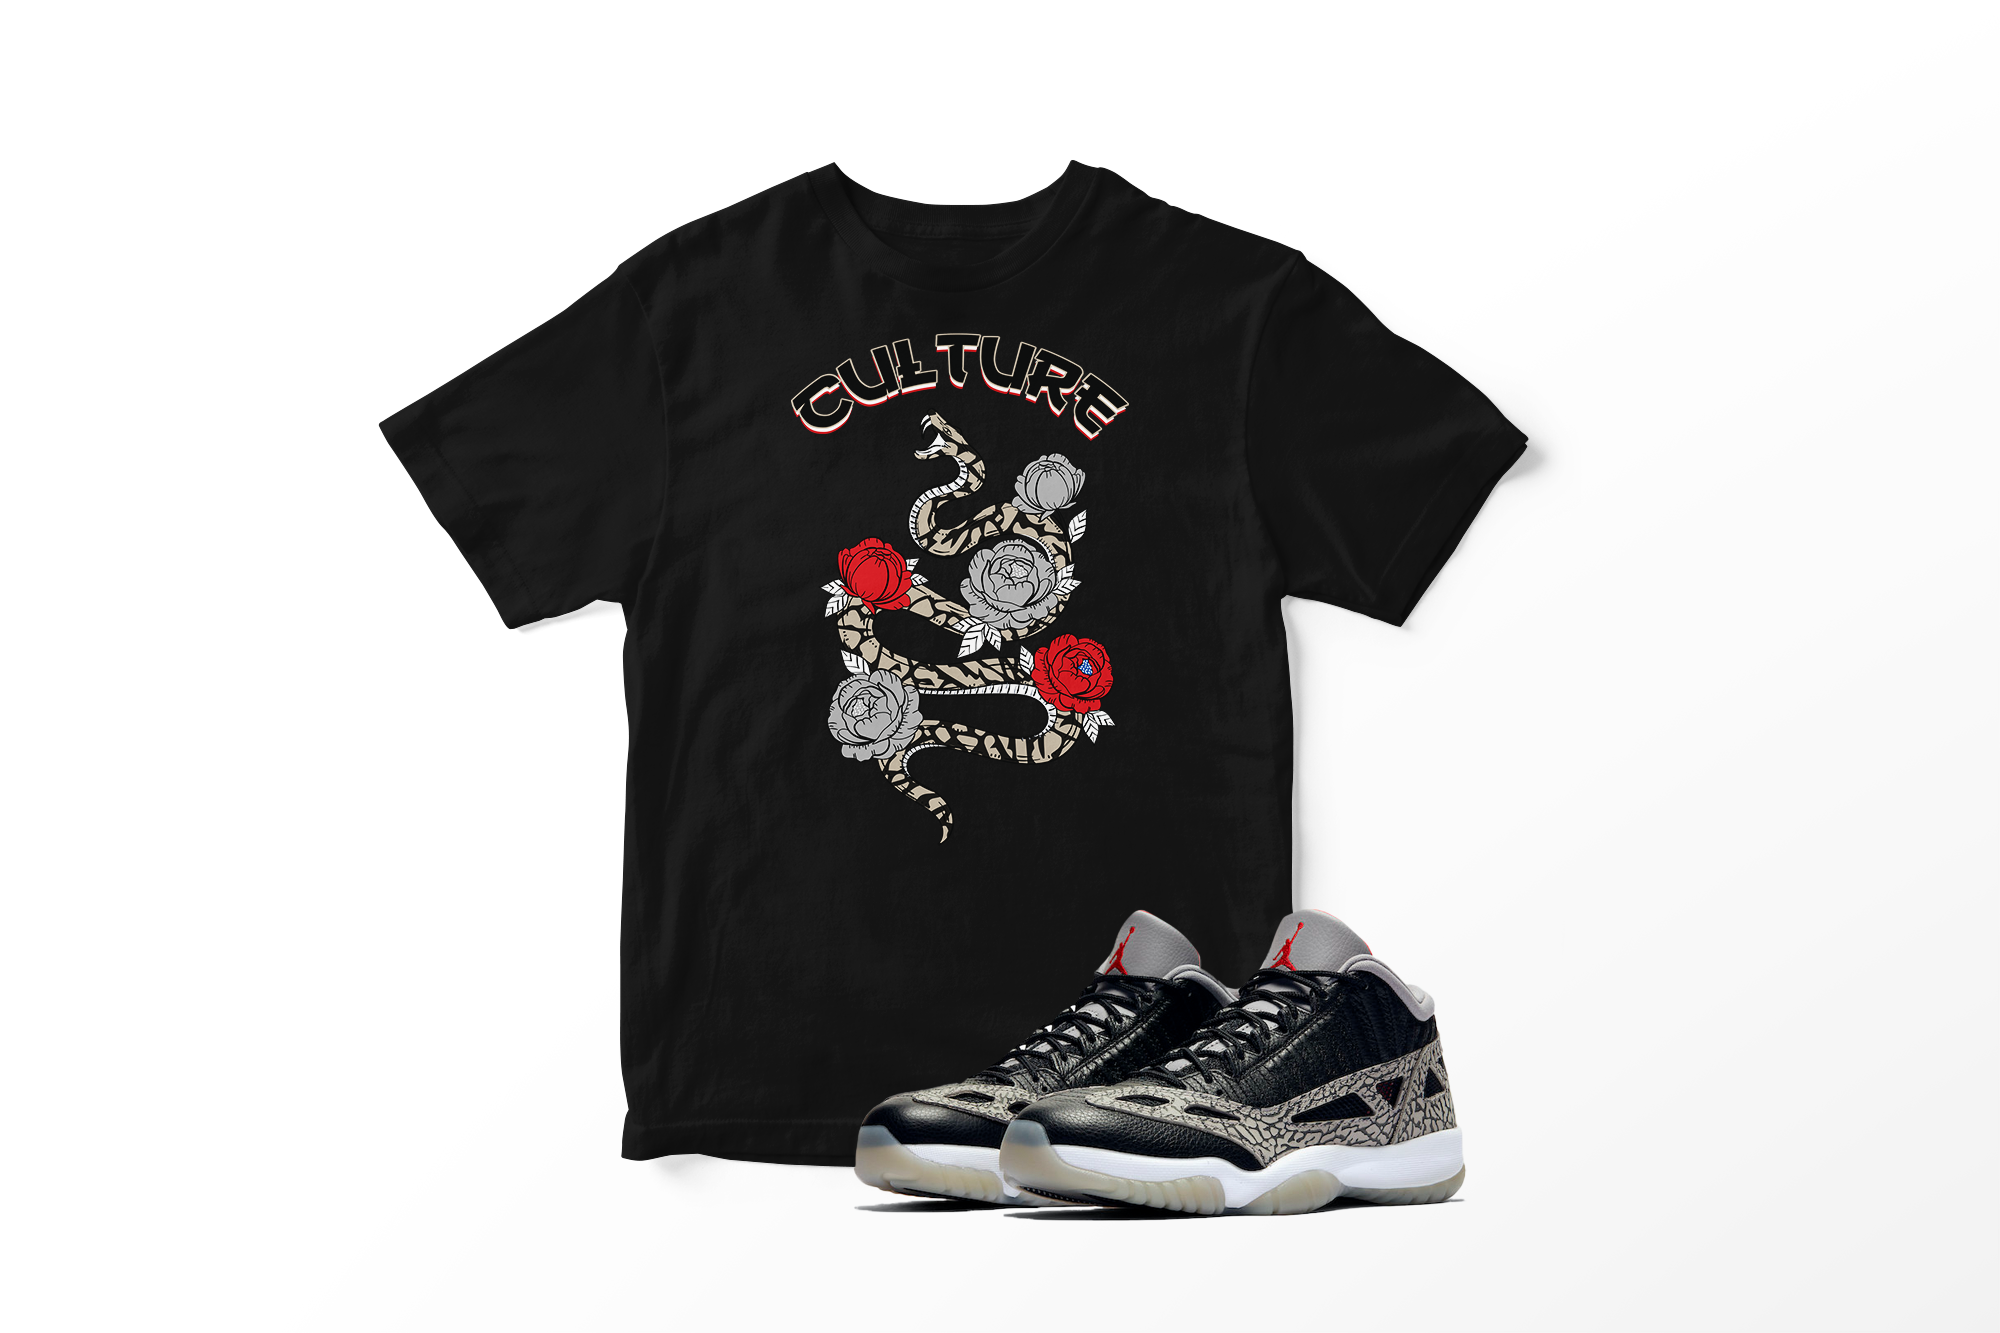 'Culture Snake' in Black Cement CW Short Sleeve Tee